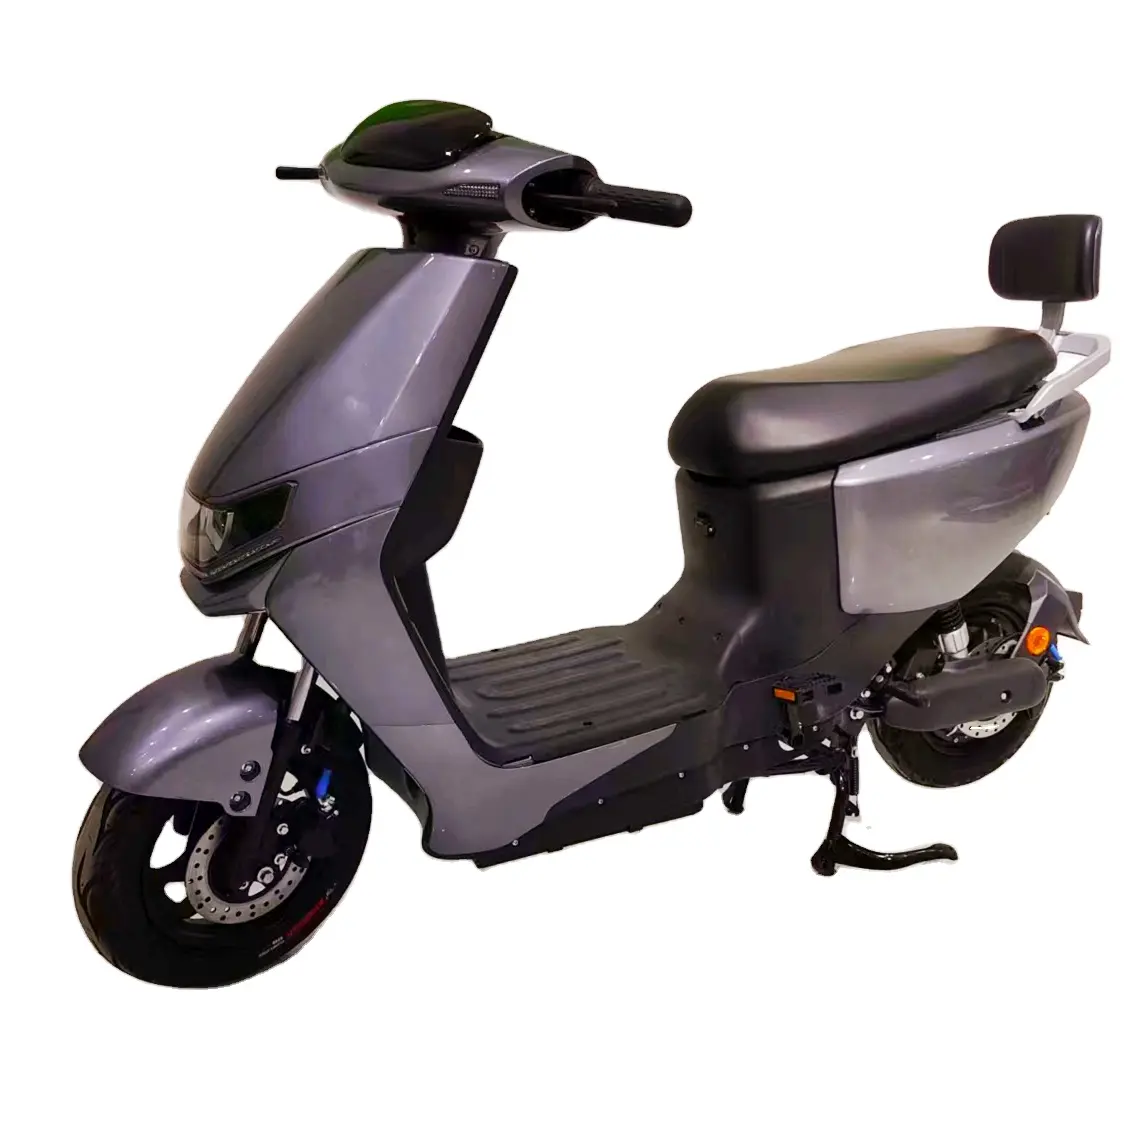 Hot selling high quality electric scooter cheap motorcycles moped with pedals electric bikes for adult